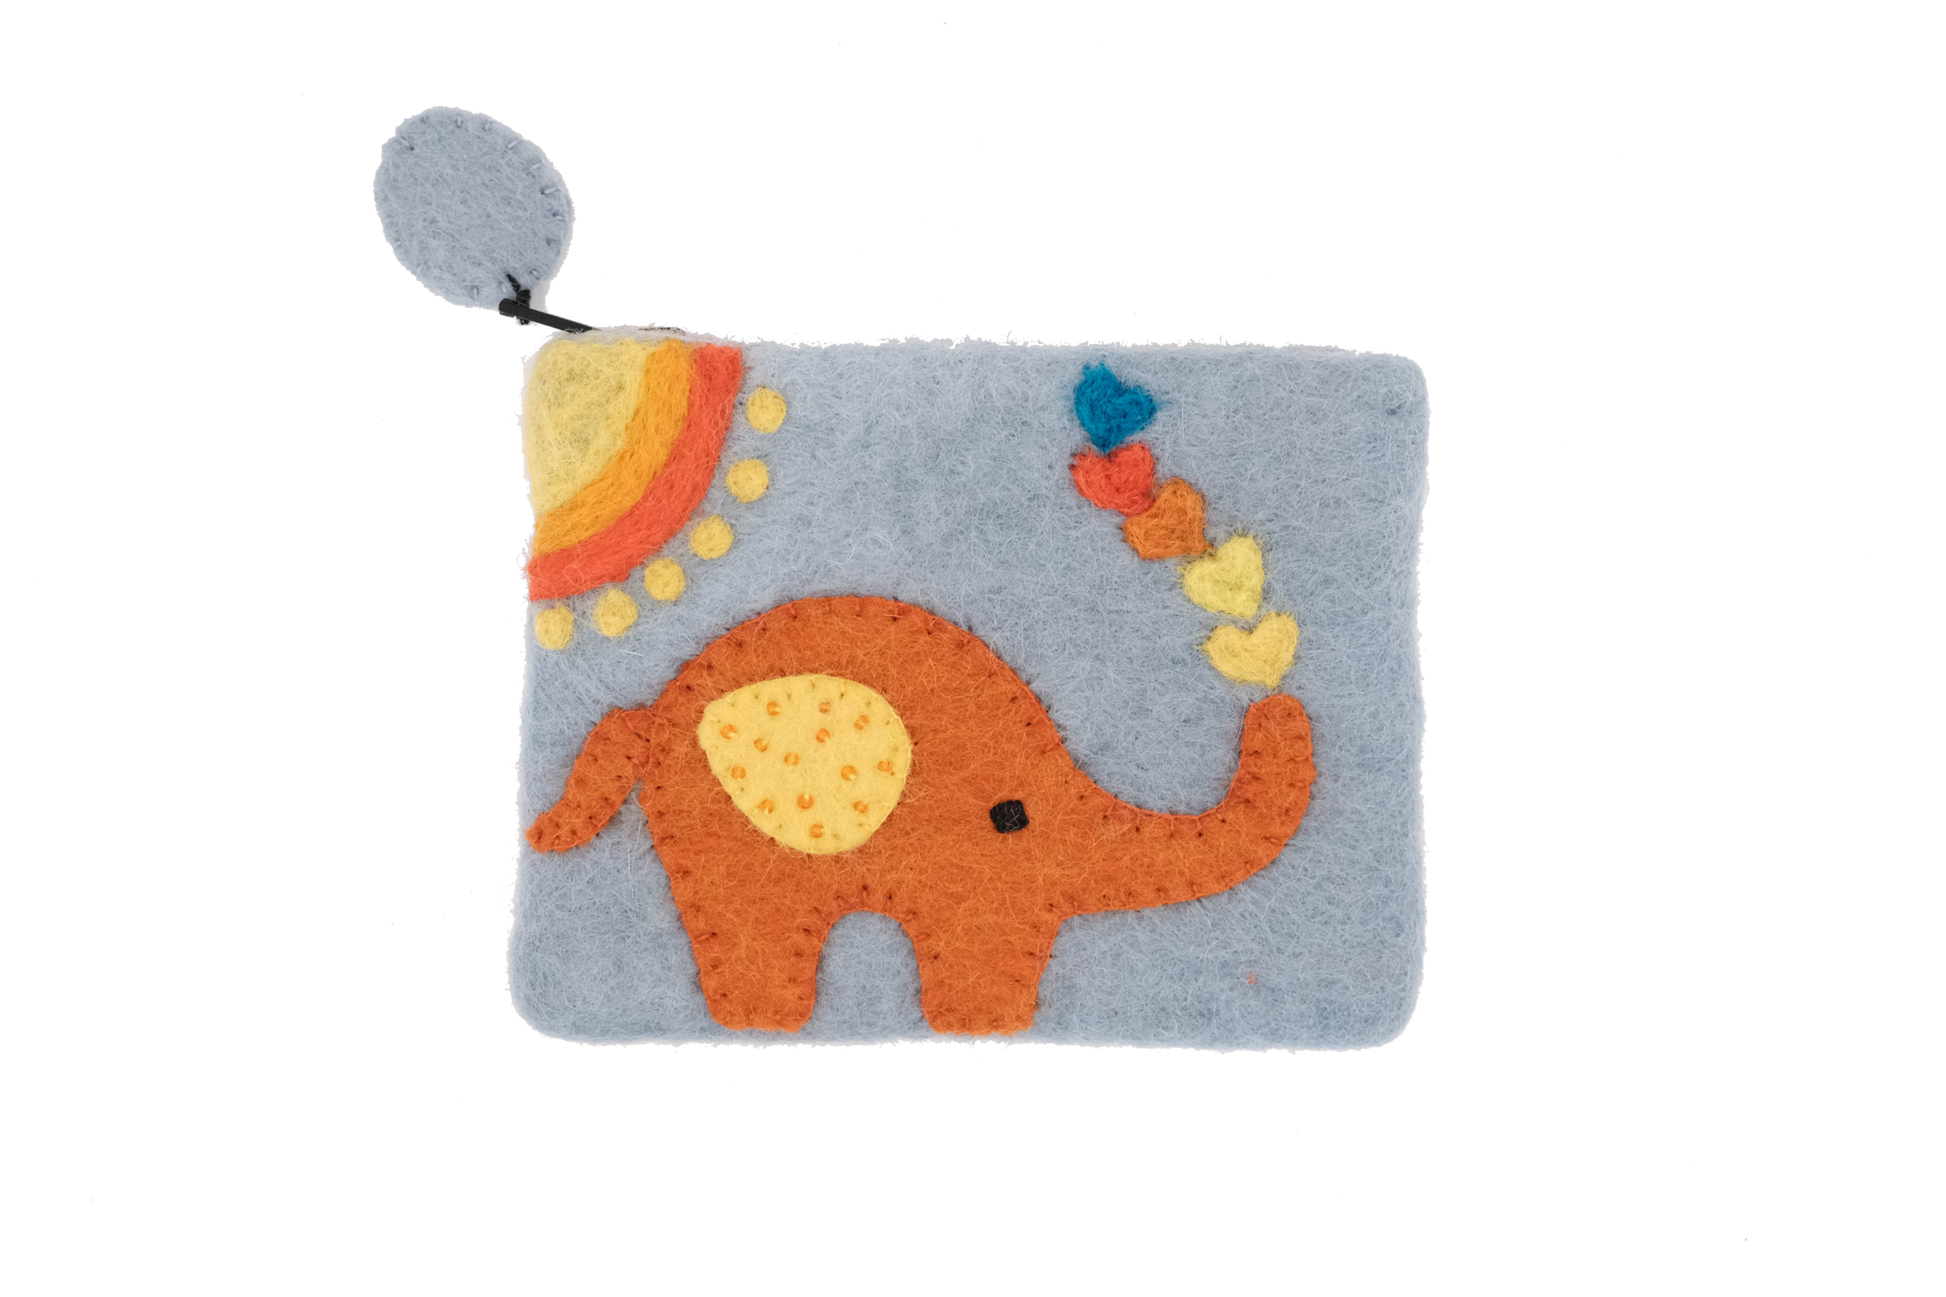 This Global Groove Life, handmade, ethical, fair trade, eco-friendly, sustainable, grey felt zipper coin pouch was created by artisans in Kathmandu Nepal and is adorned with an orange elephant with hearts and a sun motif.